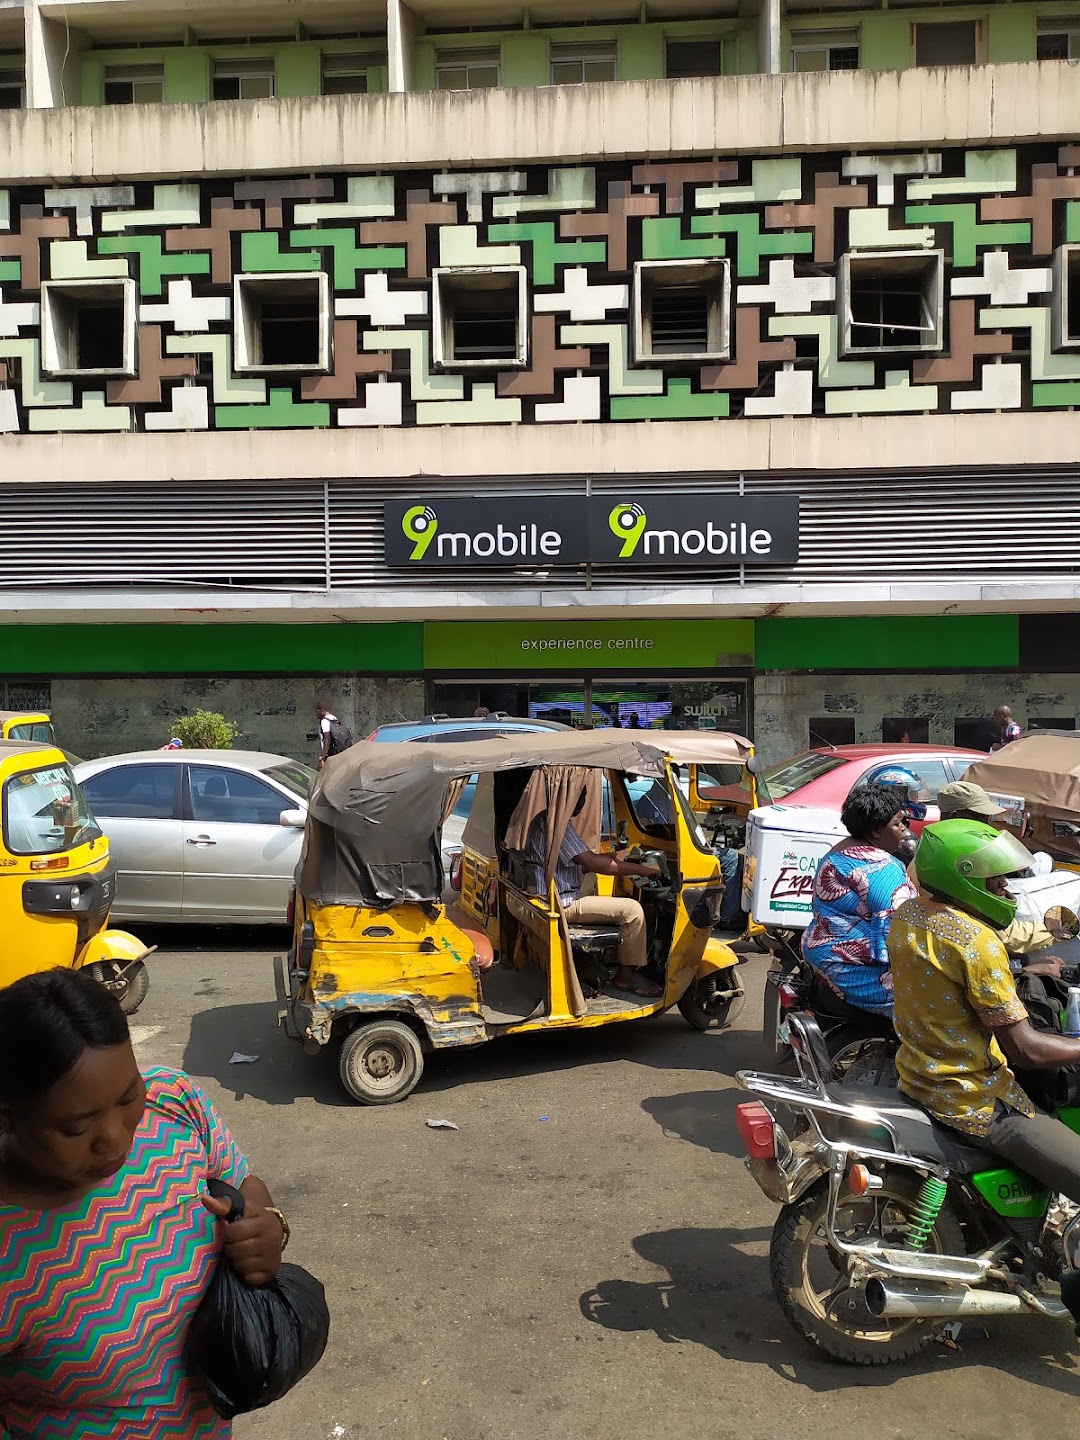 9mobile Experience Centre